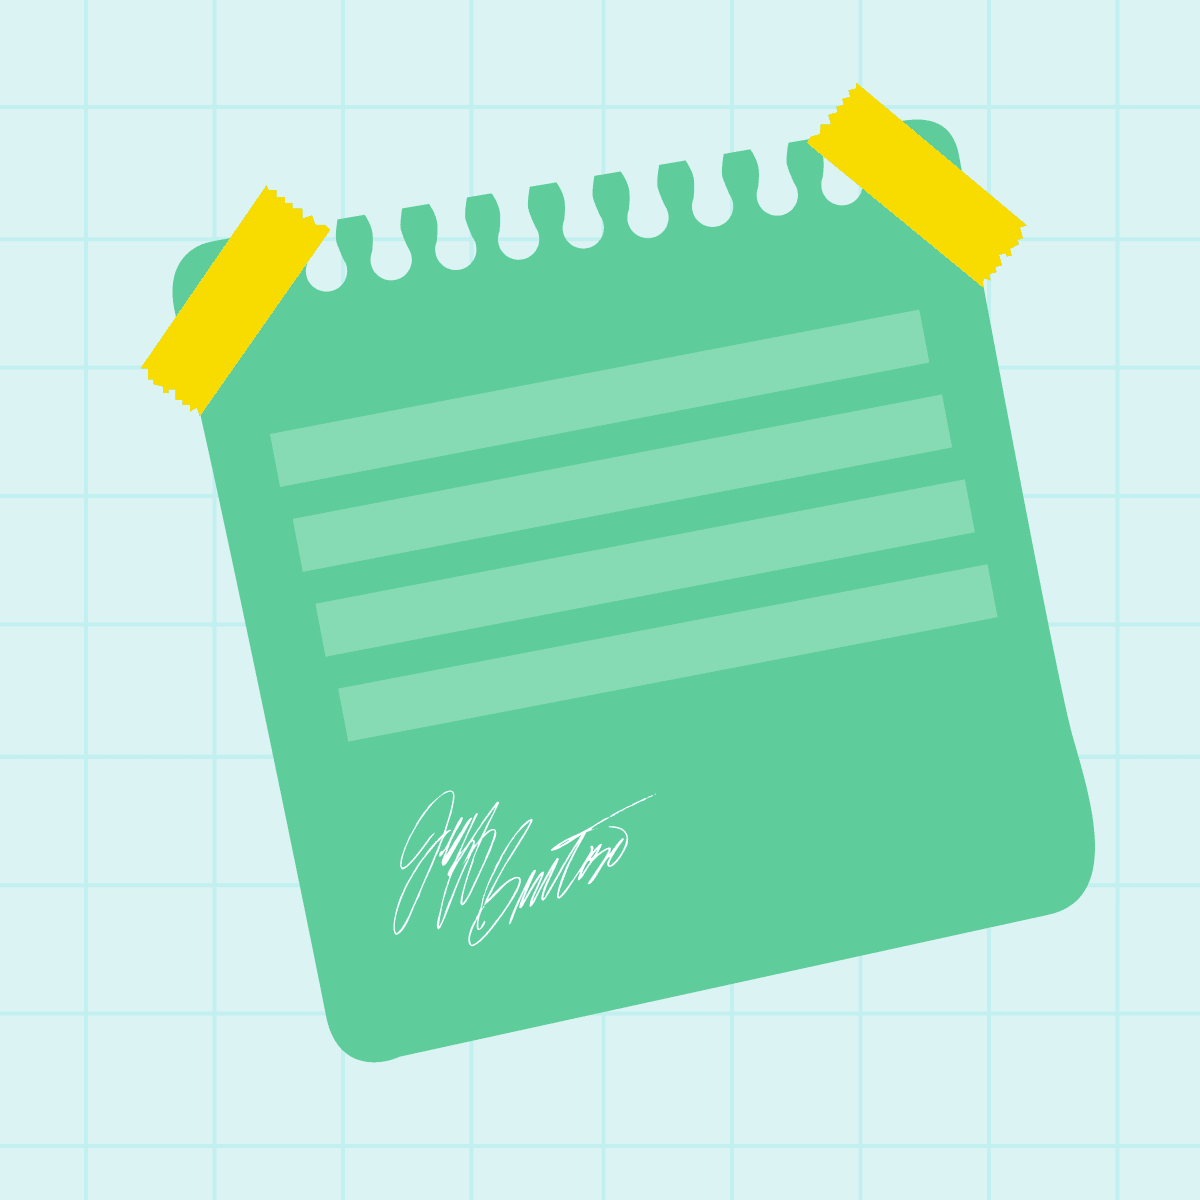 Illustration of a signed letter of recommendation